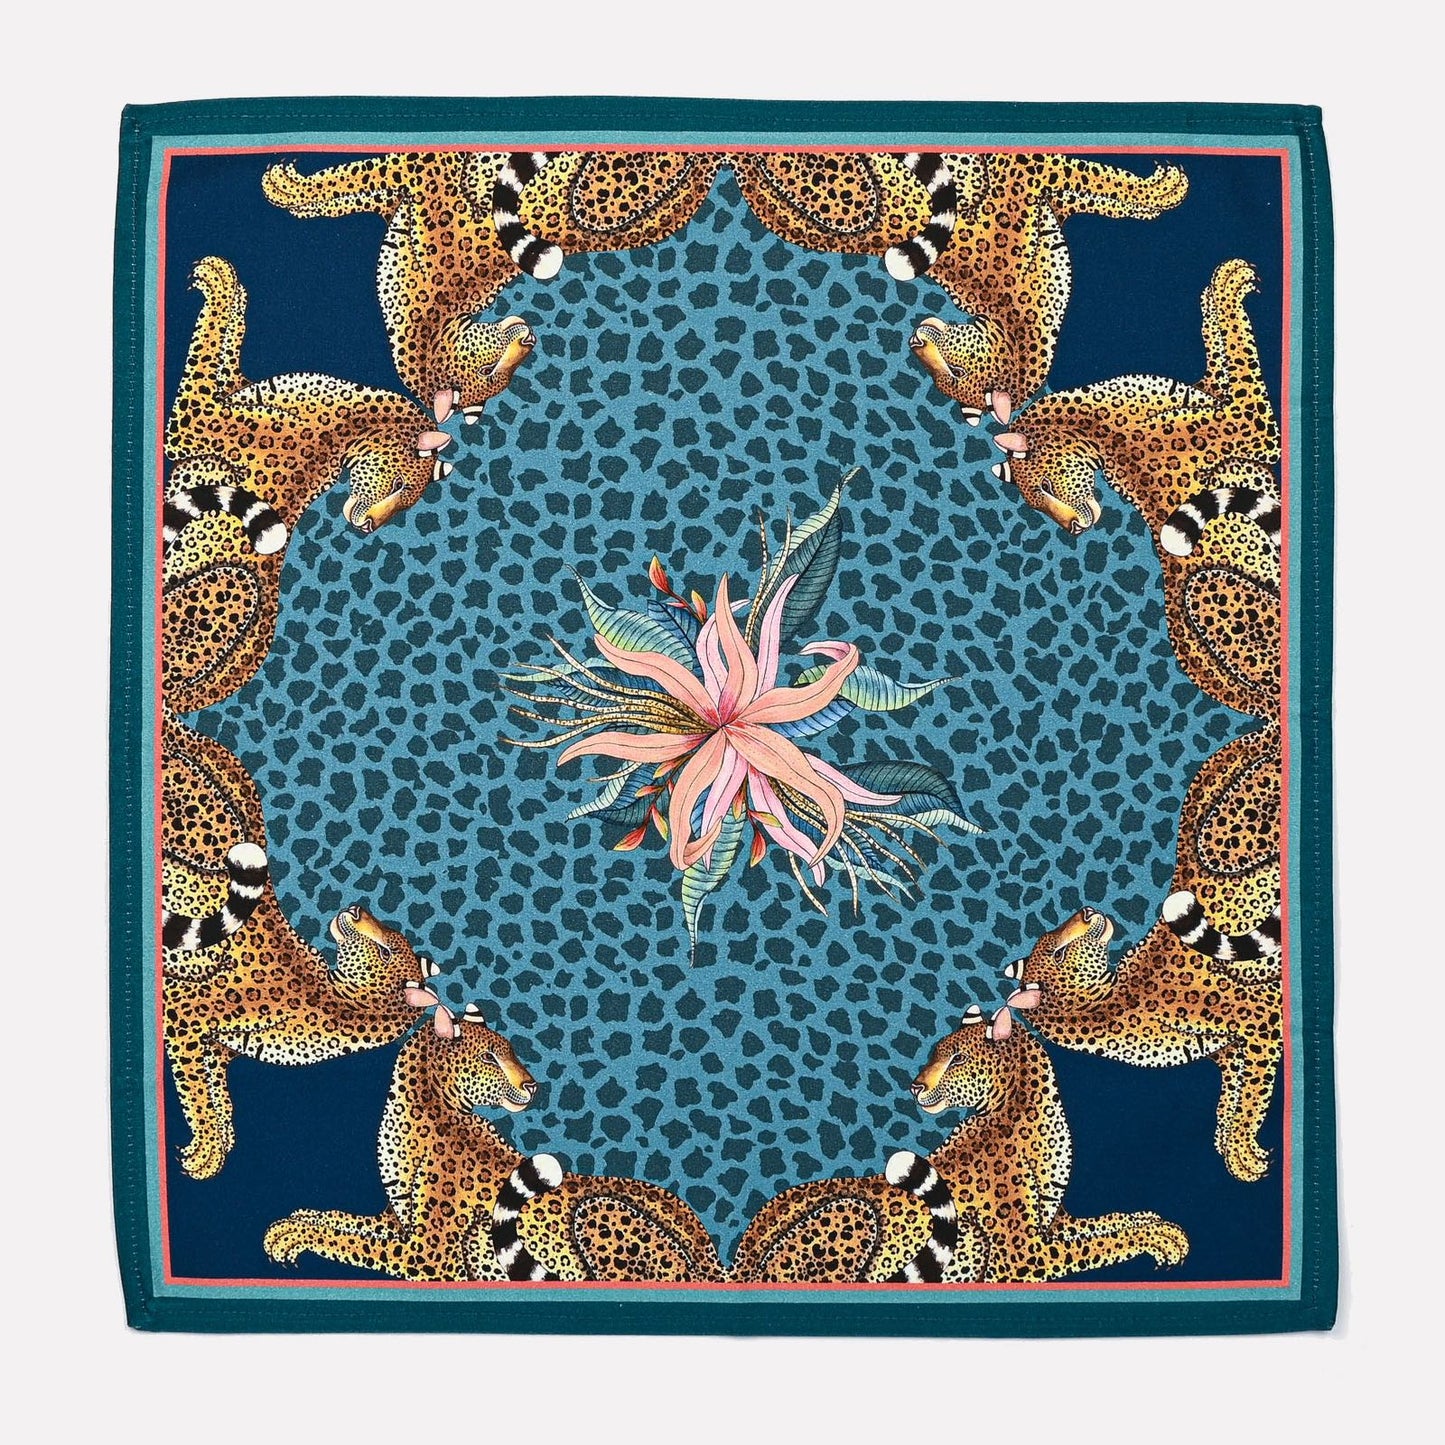 Leopard Lily Napkins in Frost (PAIR)